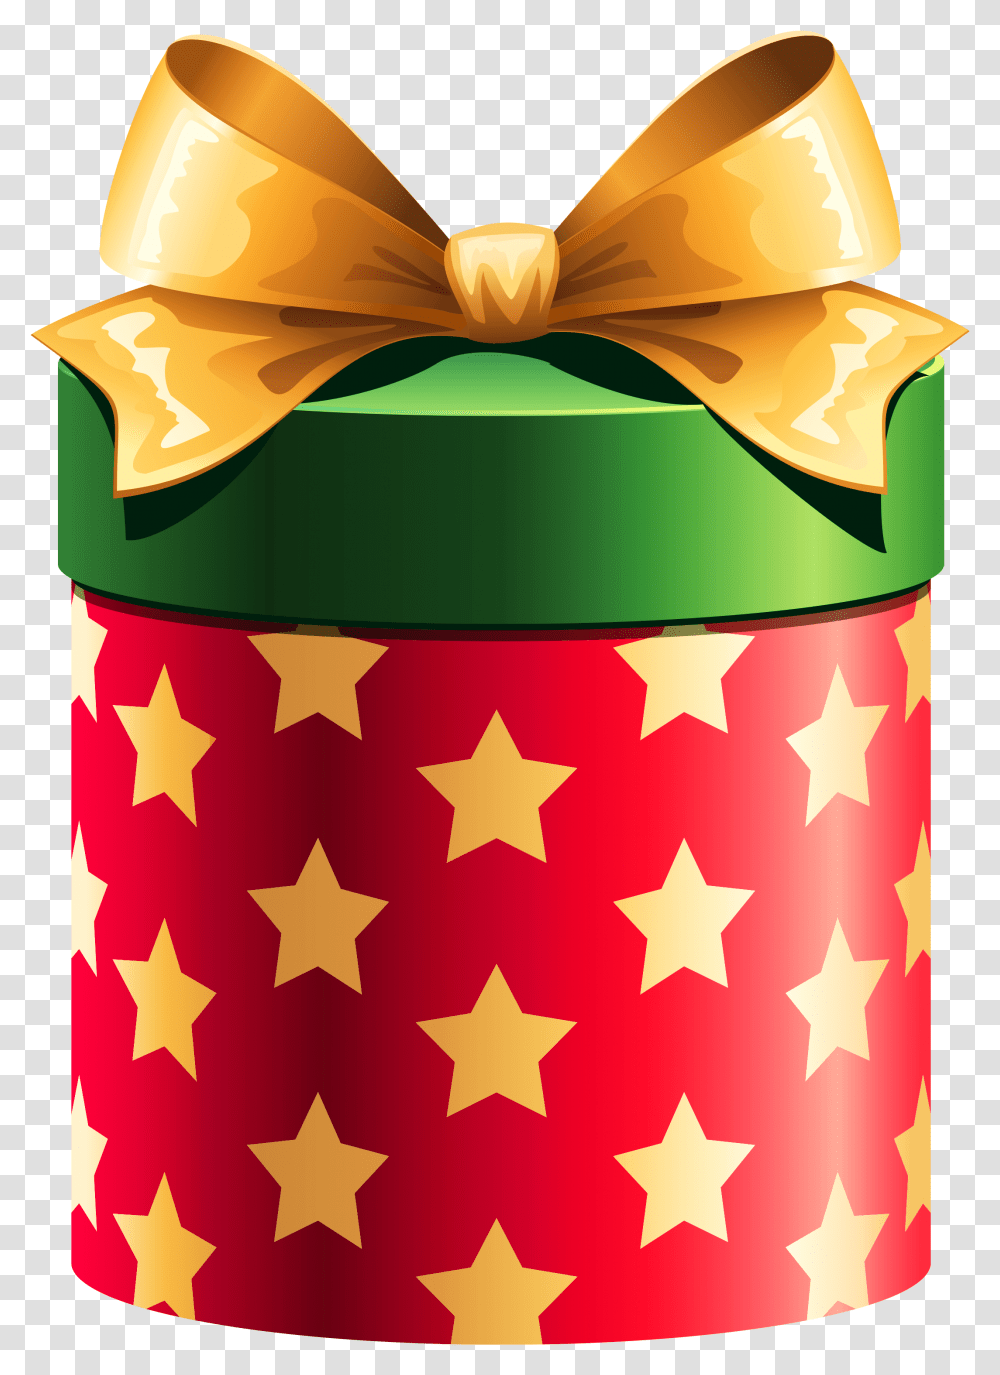 Round Red Gift Box With Gold Stars Clipart Christmas Gift Clipart, Hardhat, Helmet, Apparel Transparent Png